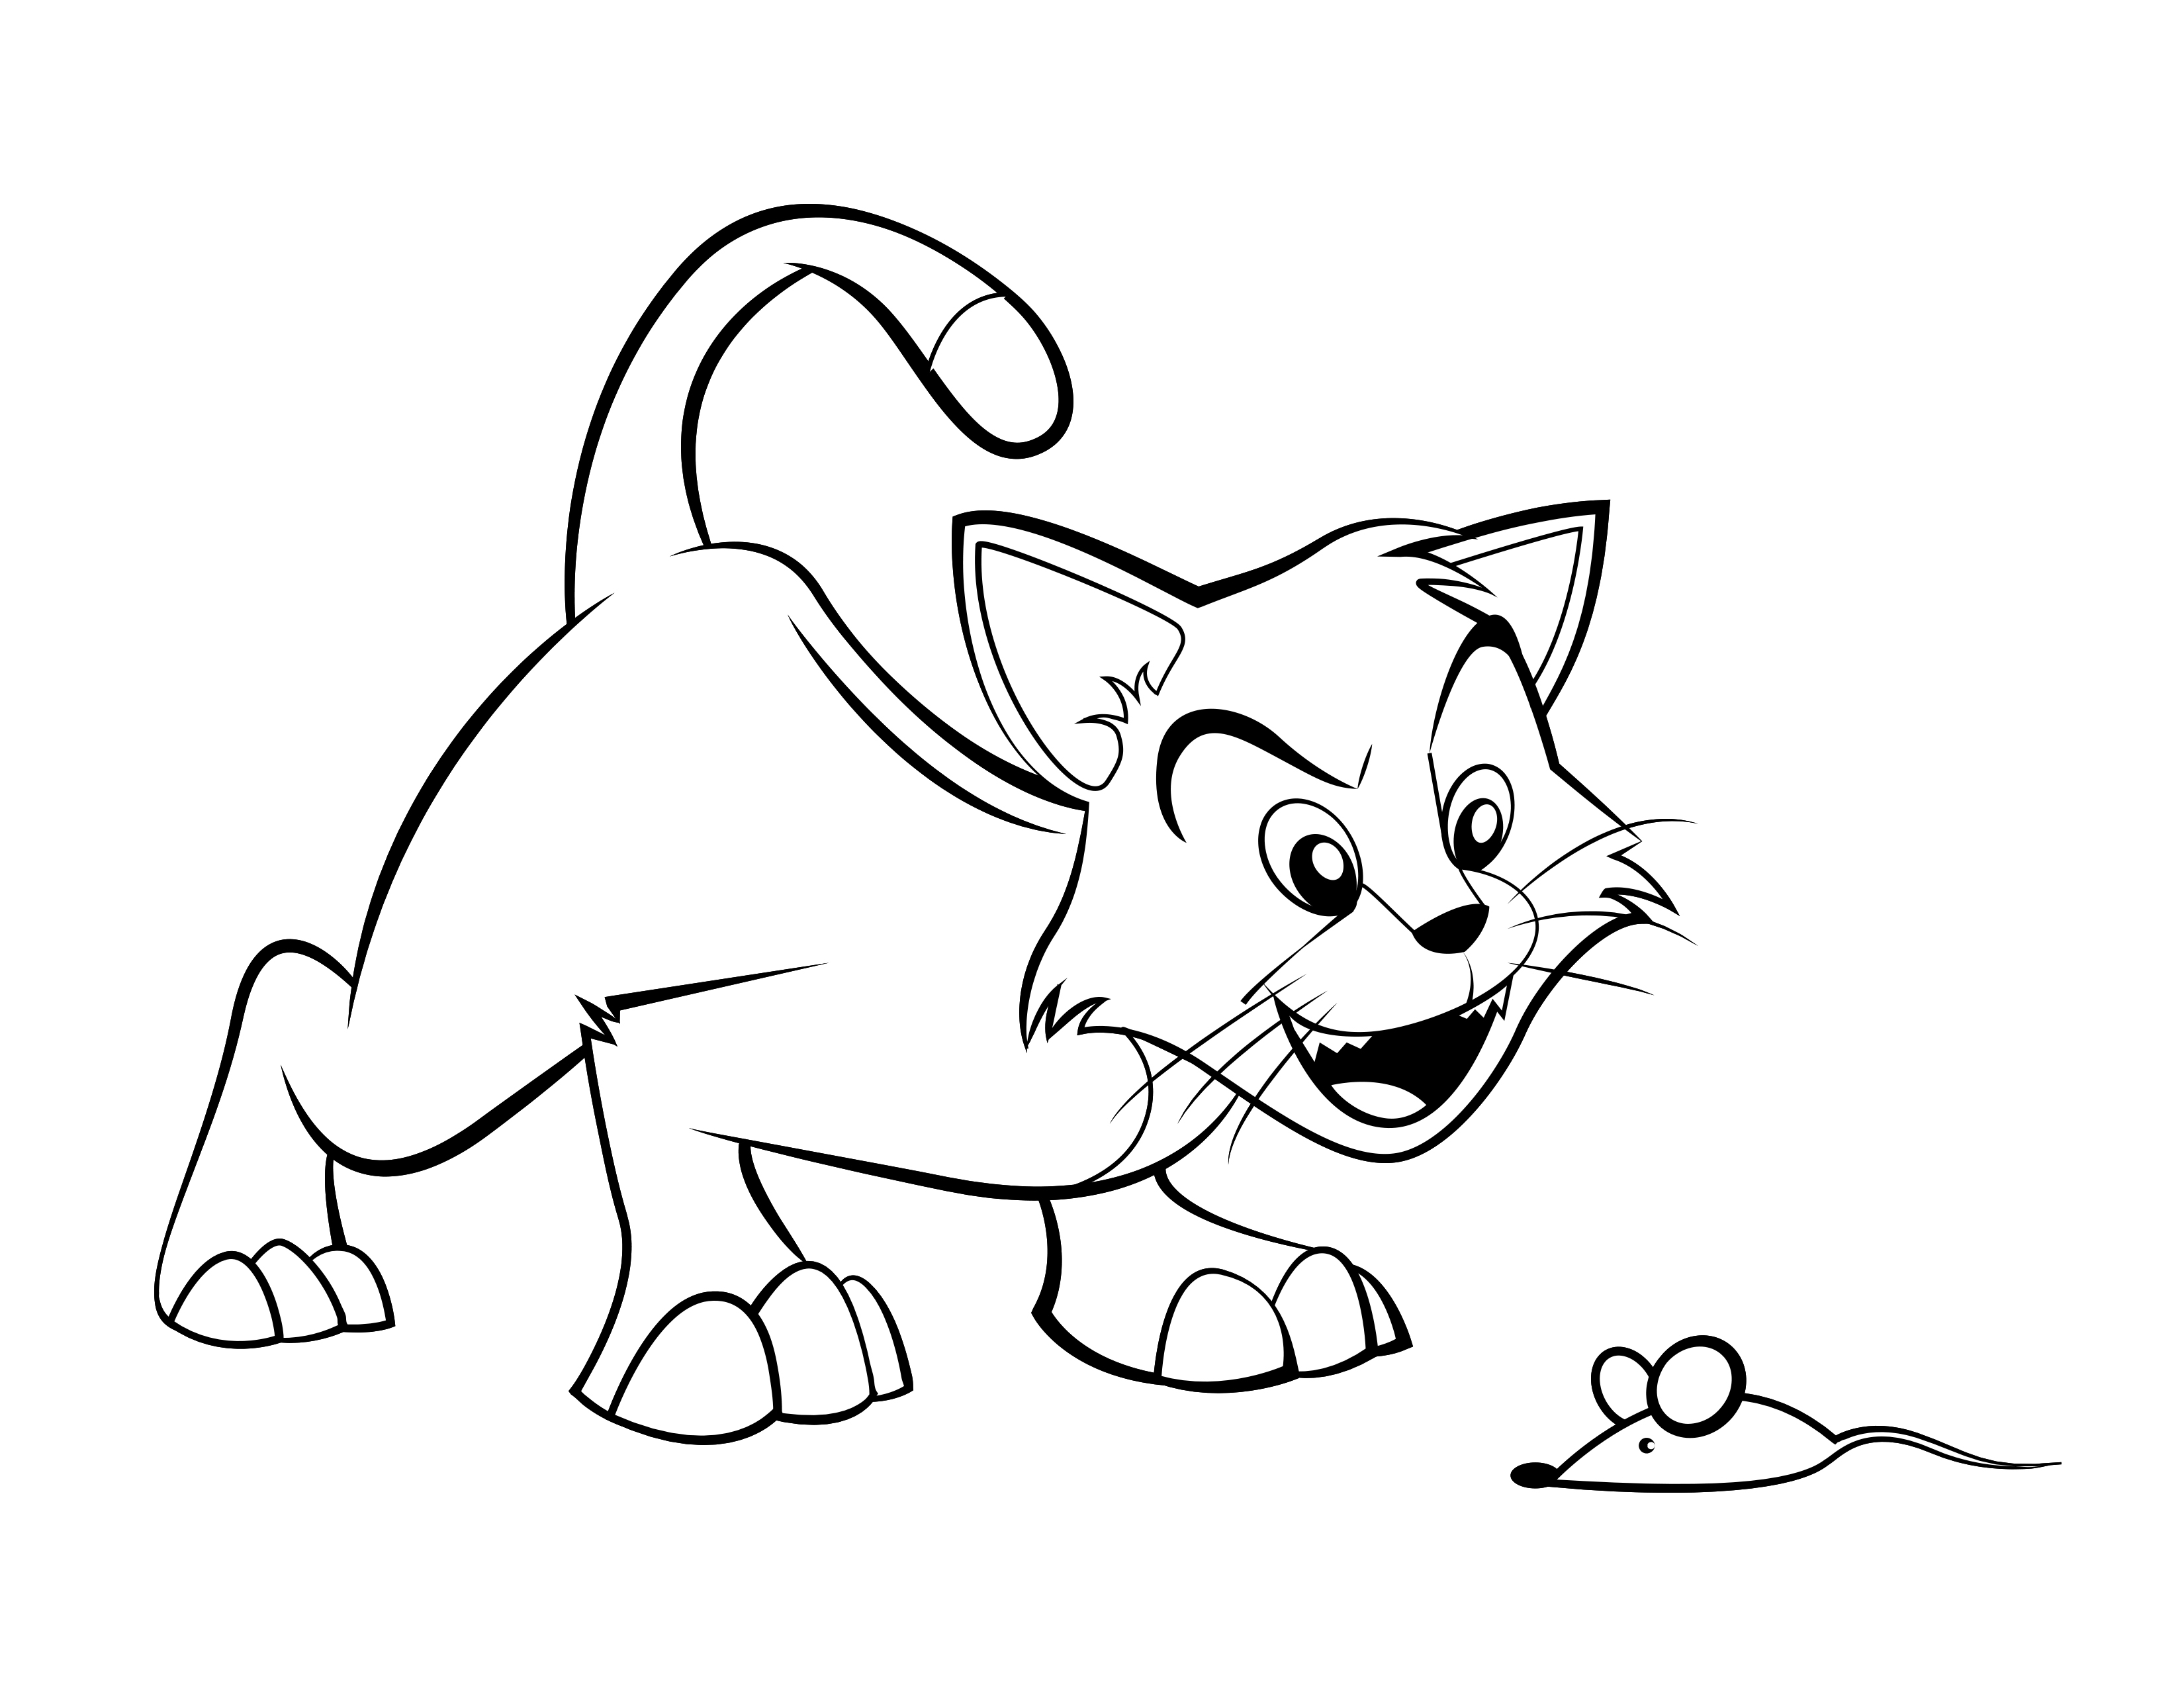 Cartoon Penguin Coloring Pages - Cliparts.co